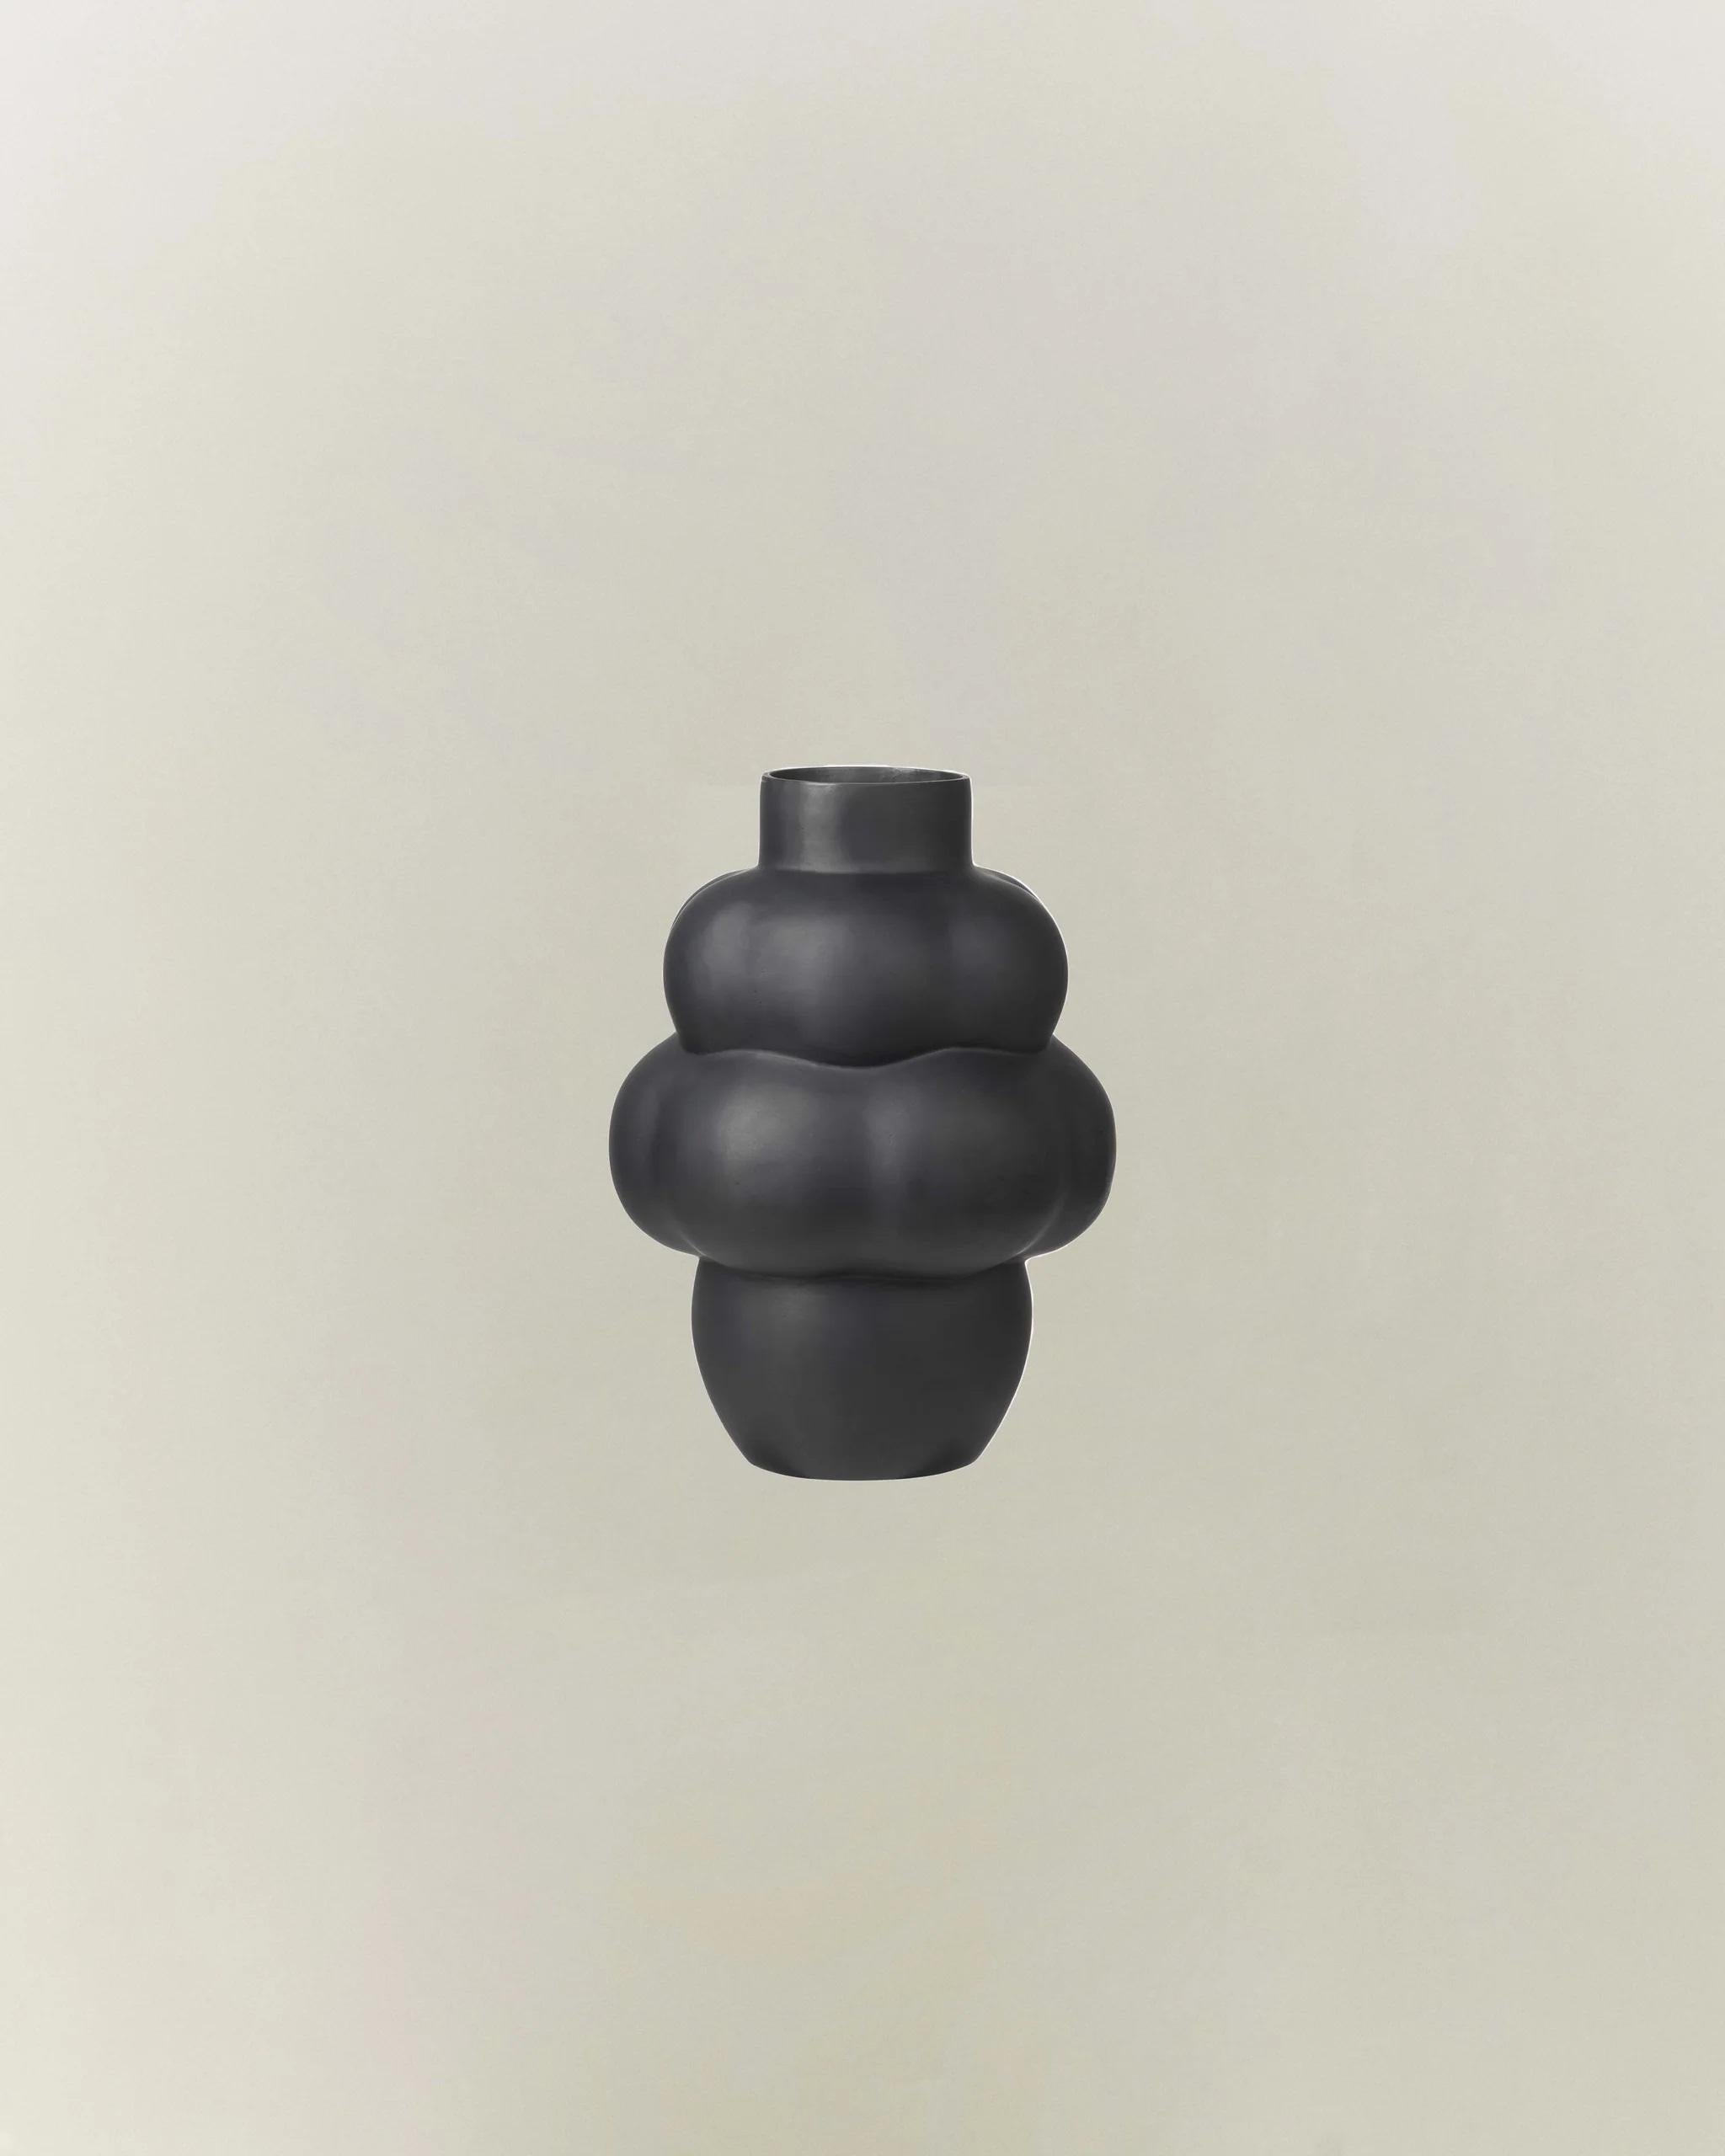 Balloon Object 001 by Louise Roe
Dimensions: Ø 24 x H 32 cm.
Materials: Oxydied black steel.

THE ROE STUDIO BALLOON OBJECT 001
Hand-made in a secluded smithy situated in a rural Portuguese region, the artistic sculpture exemplifies a blend between